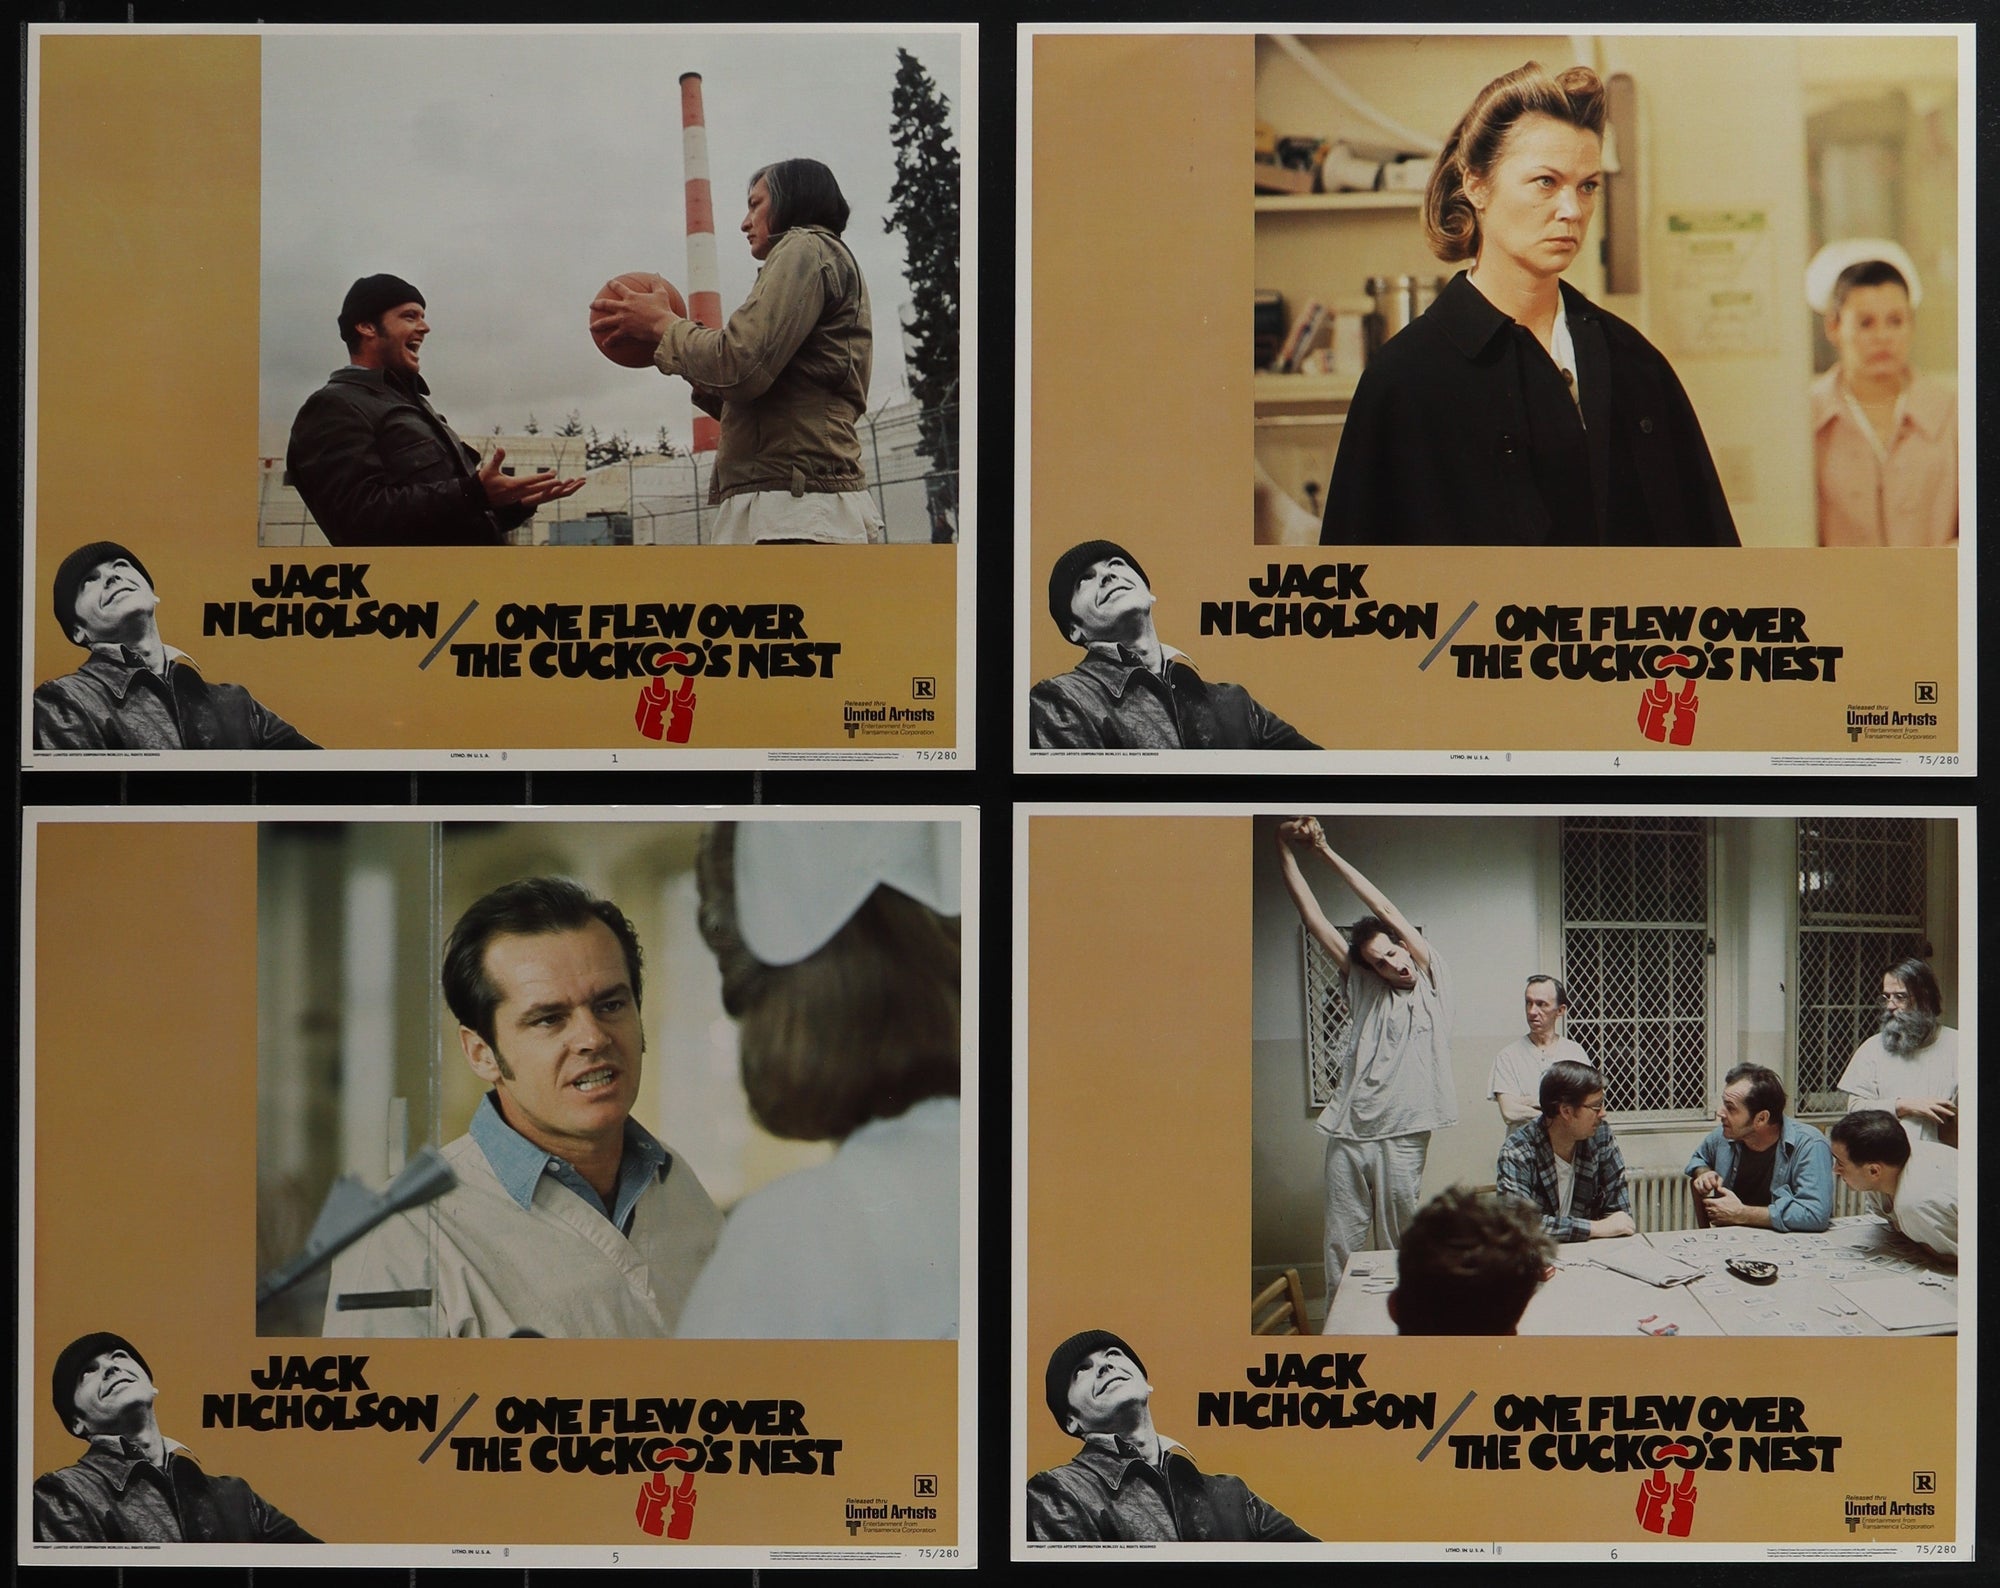 One Flew Over the Cuckoo's Nest Lobby Card Set (8-11x14) Original Vintage Movie Poster